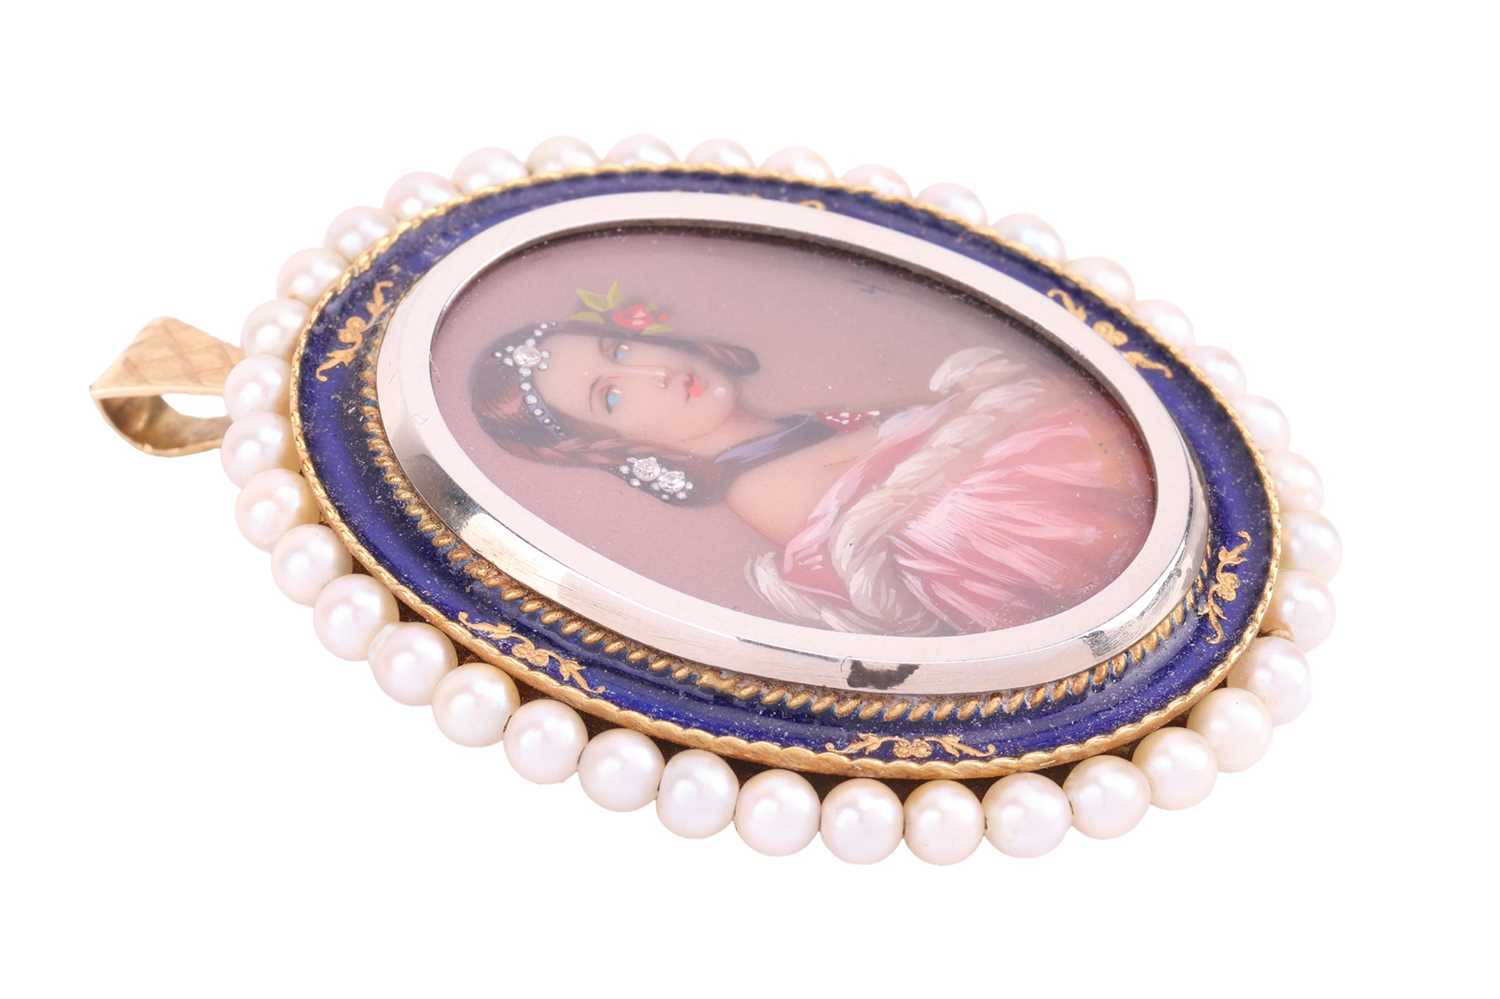 A seed pearl and enamel portrait miniature pendant-cum-brooch, depicting a portrait of a lady in a p - Image 3 of 3